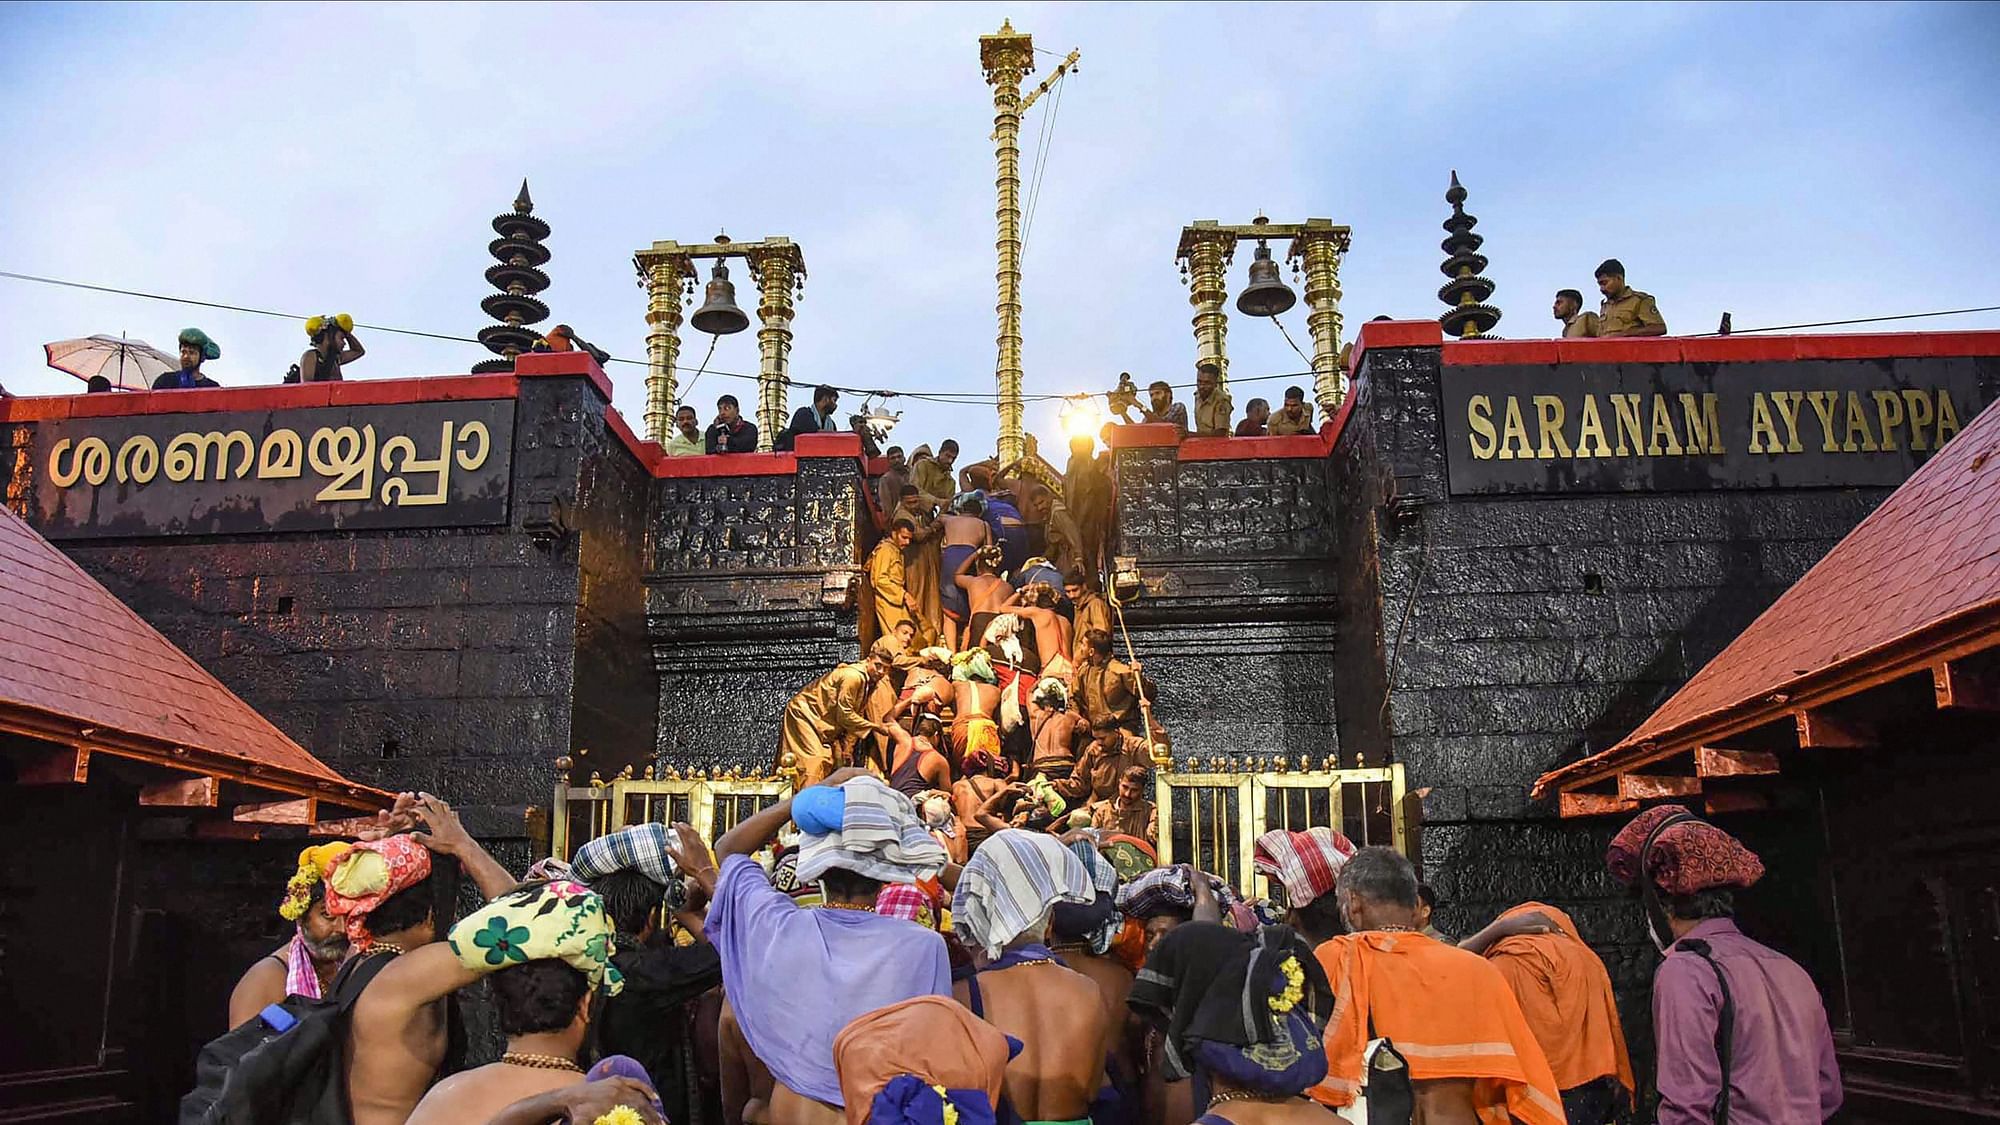 The Kerala government decided not to allow pilgrims to the Lord Ayyappa temple at Sabarimala in Pathanamthitta district for the annual festival.